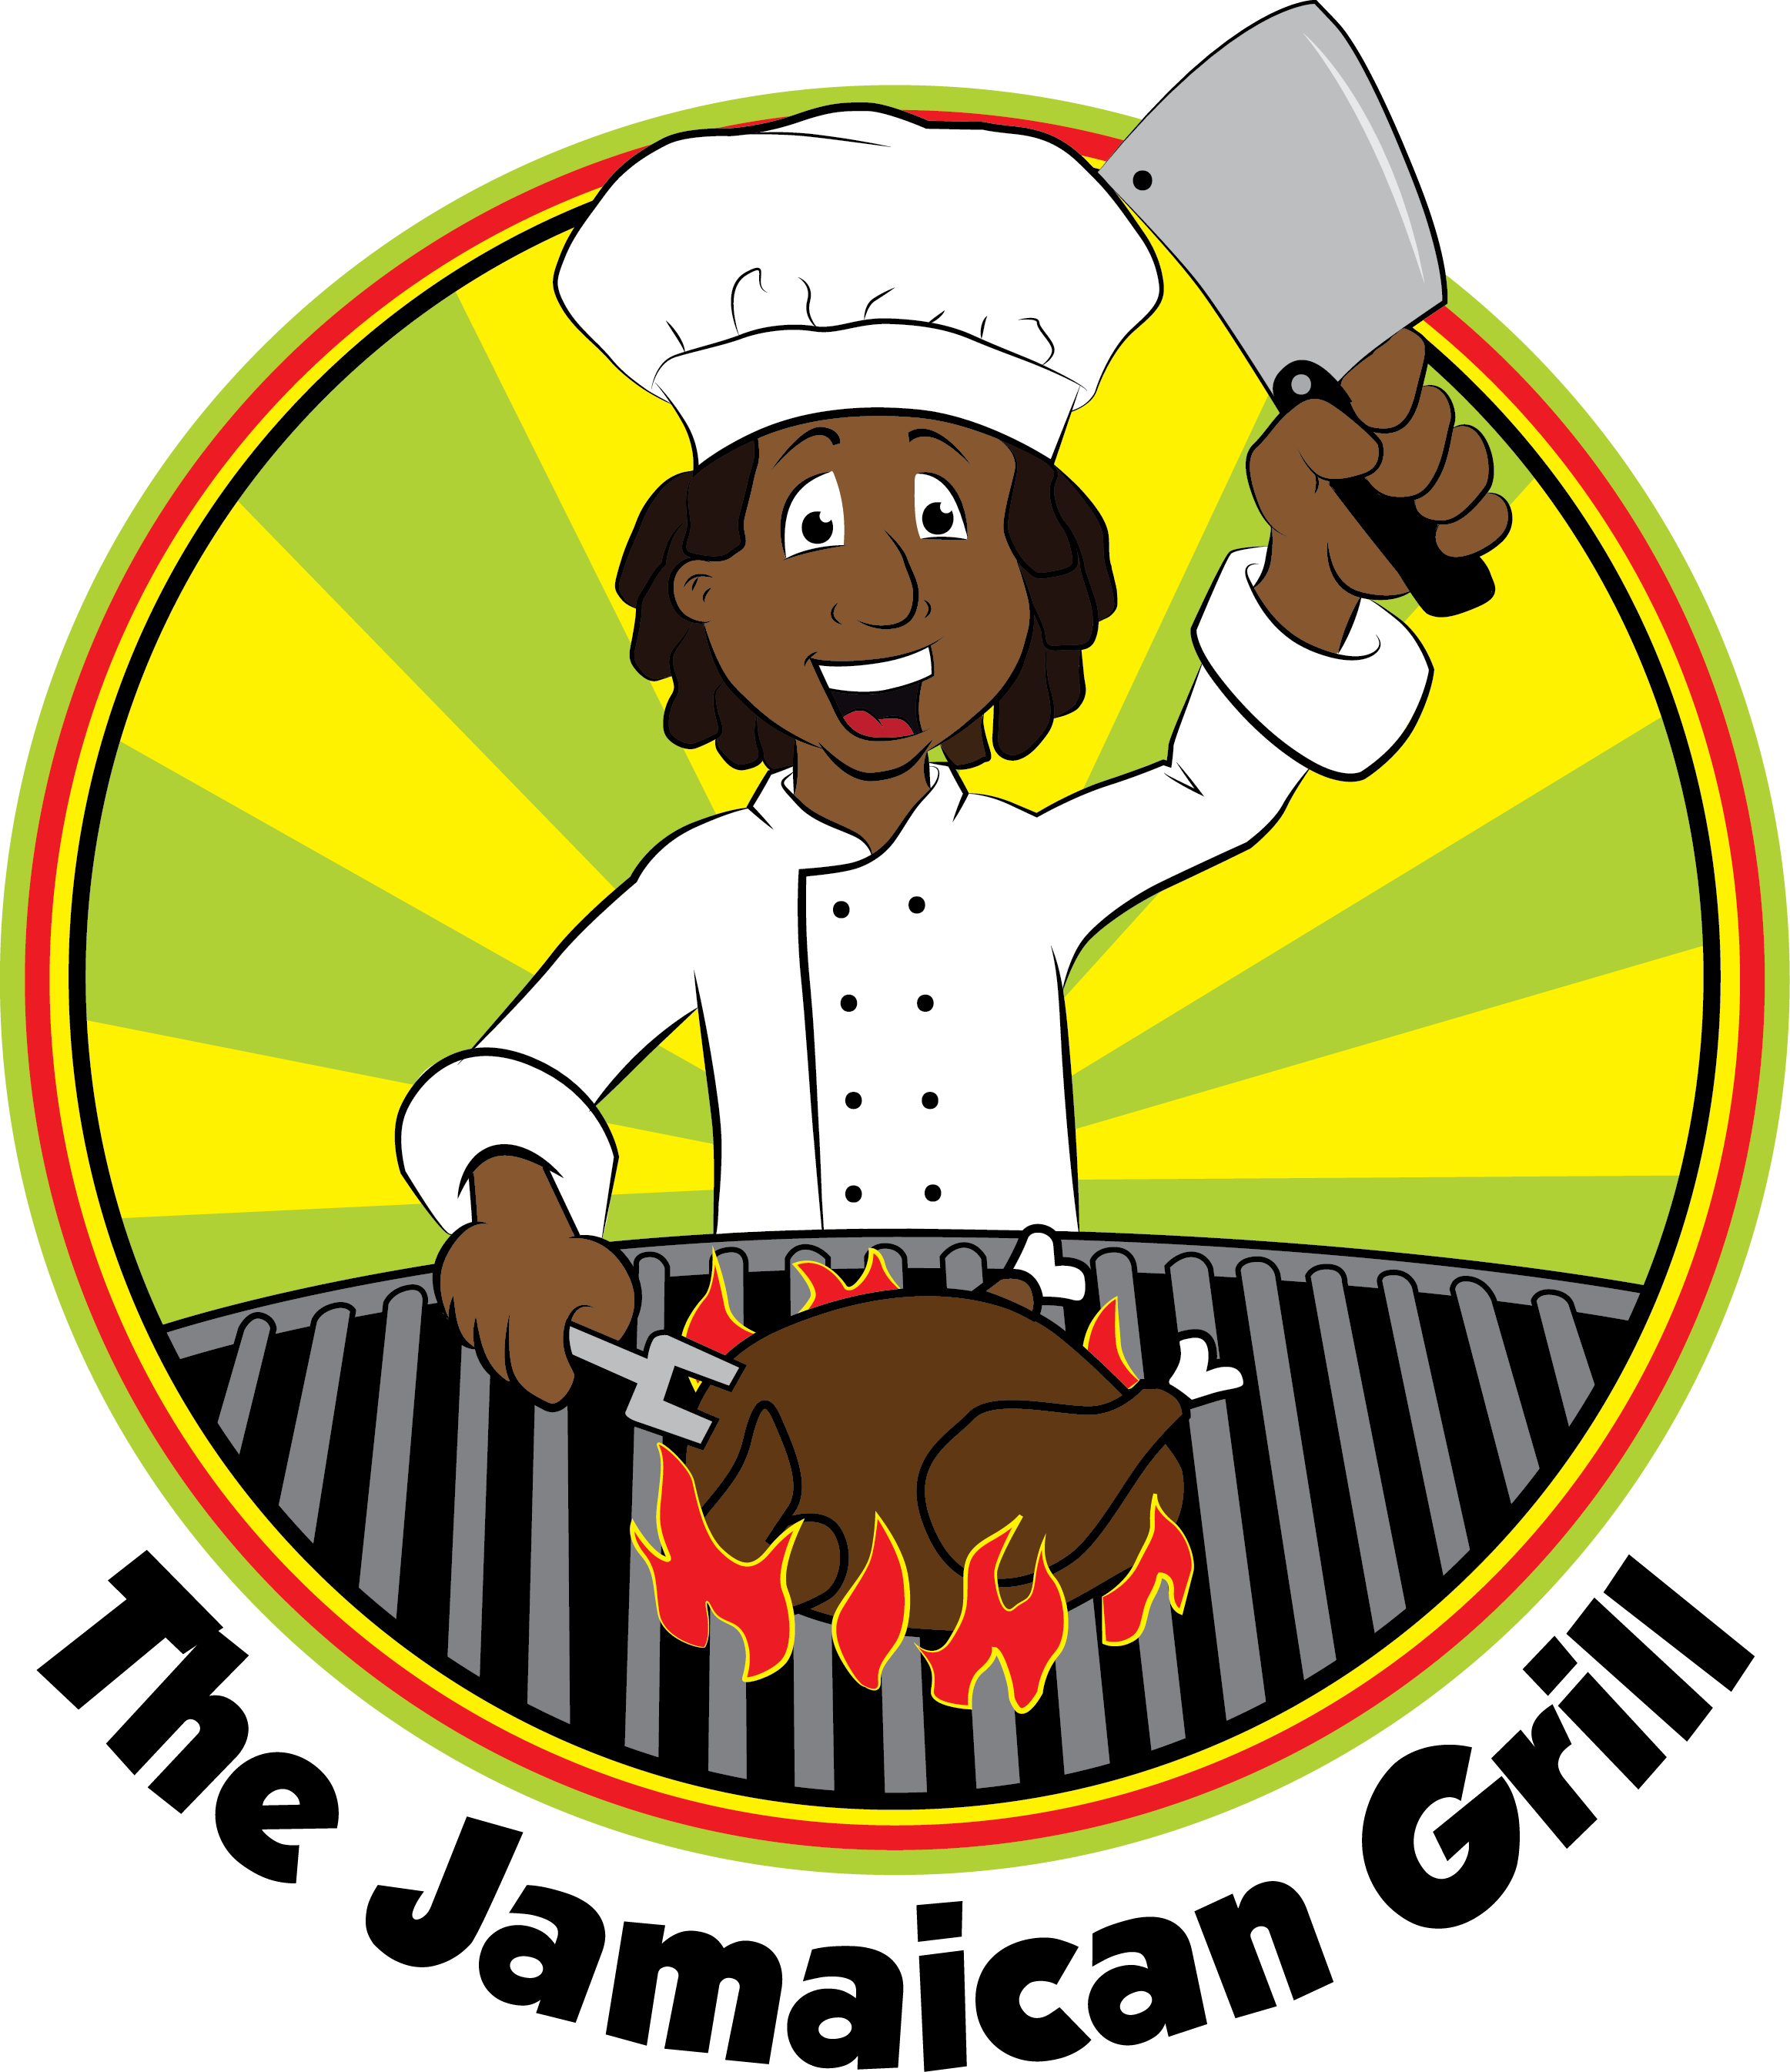 Archives products the jamaican. Grill clipart grill food